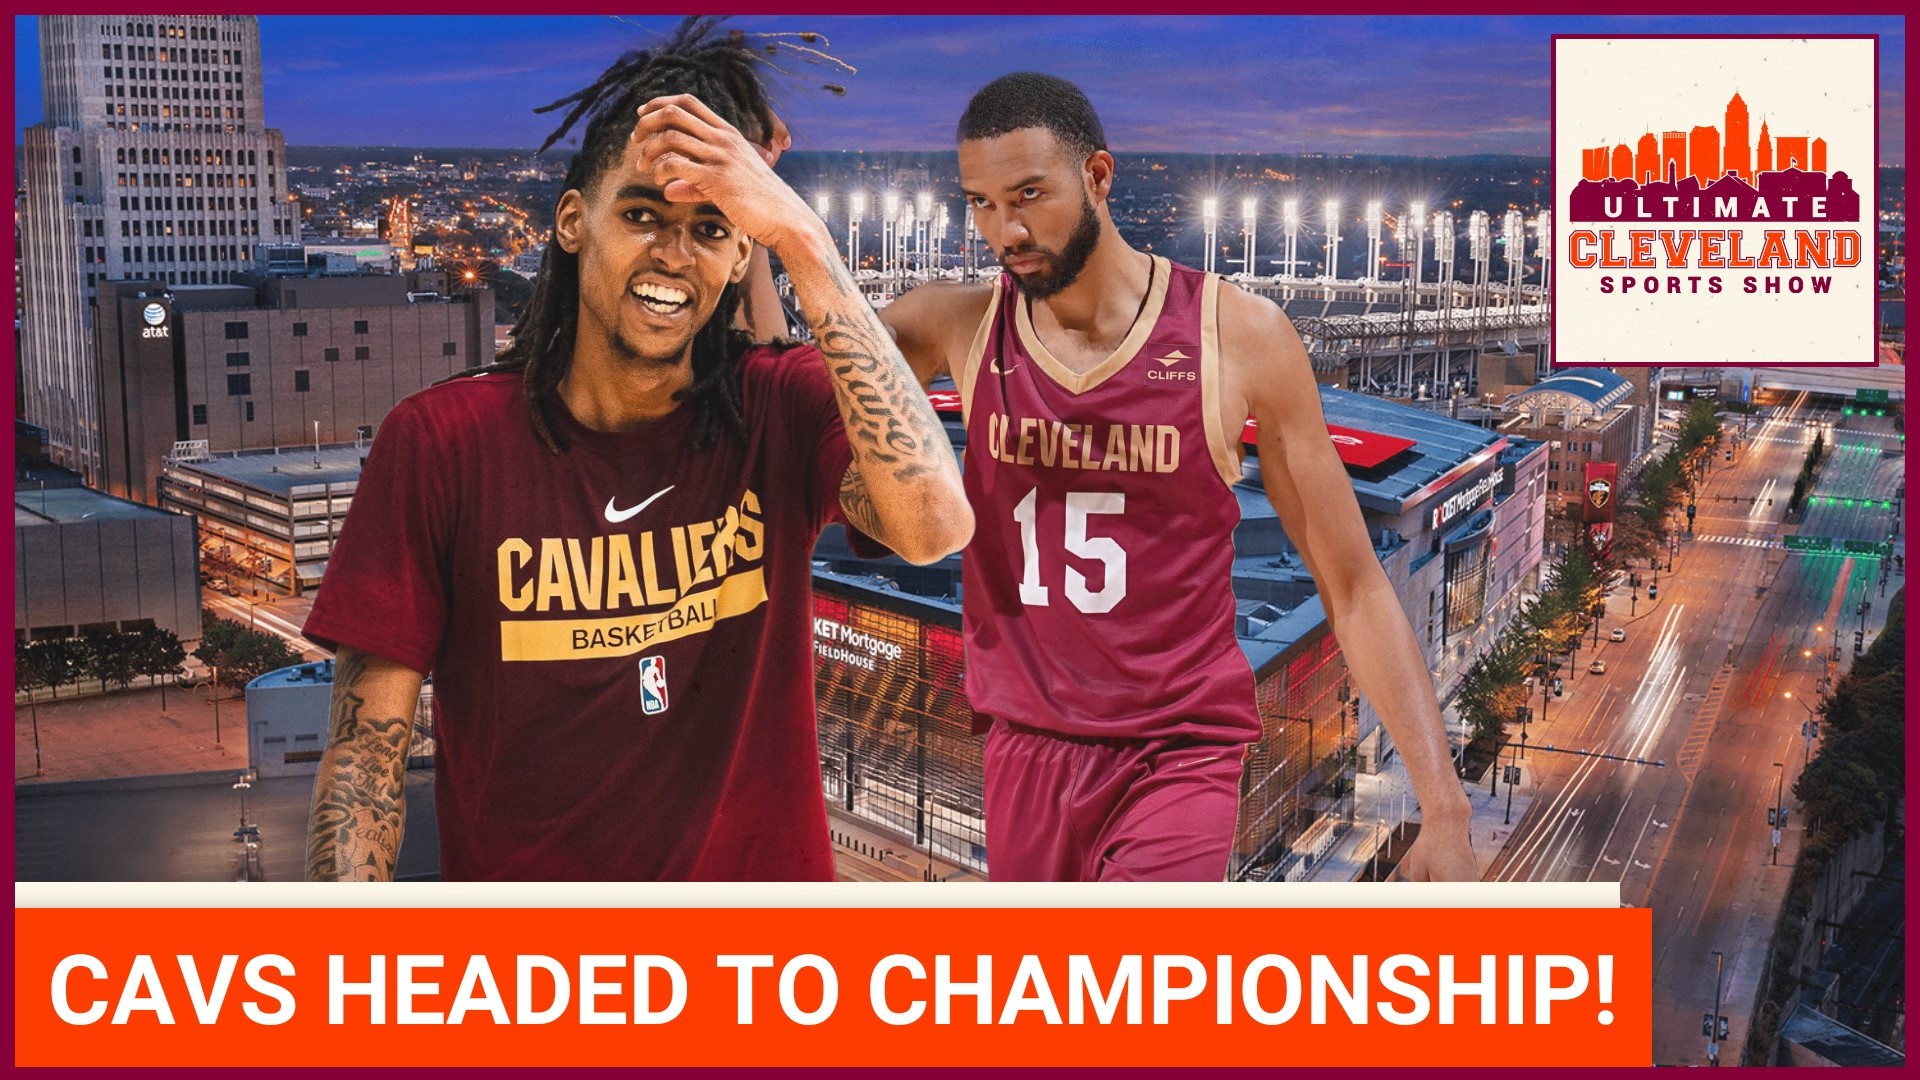 NBA Summer League on X: The Championship Game is set